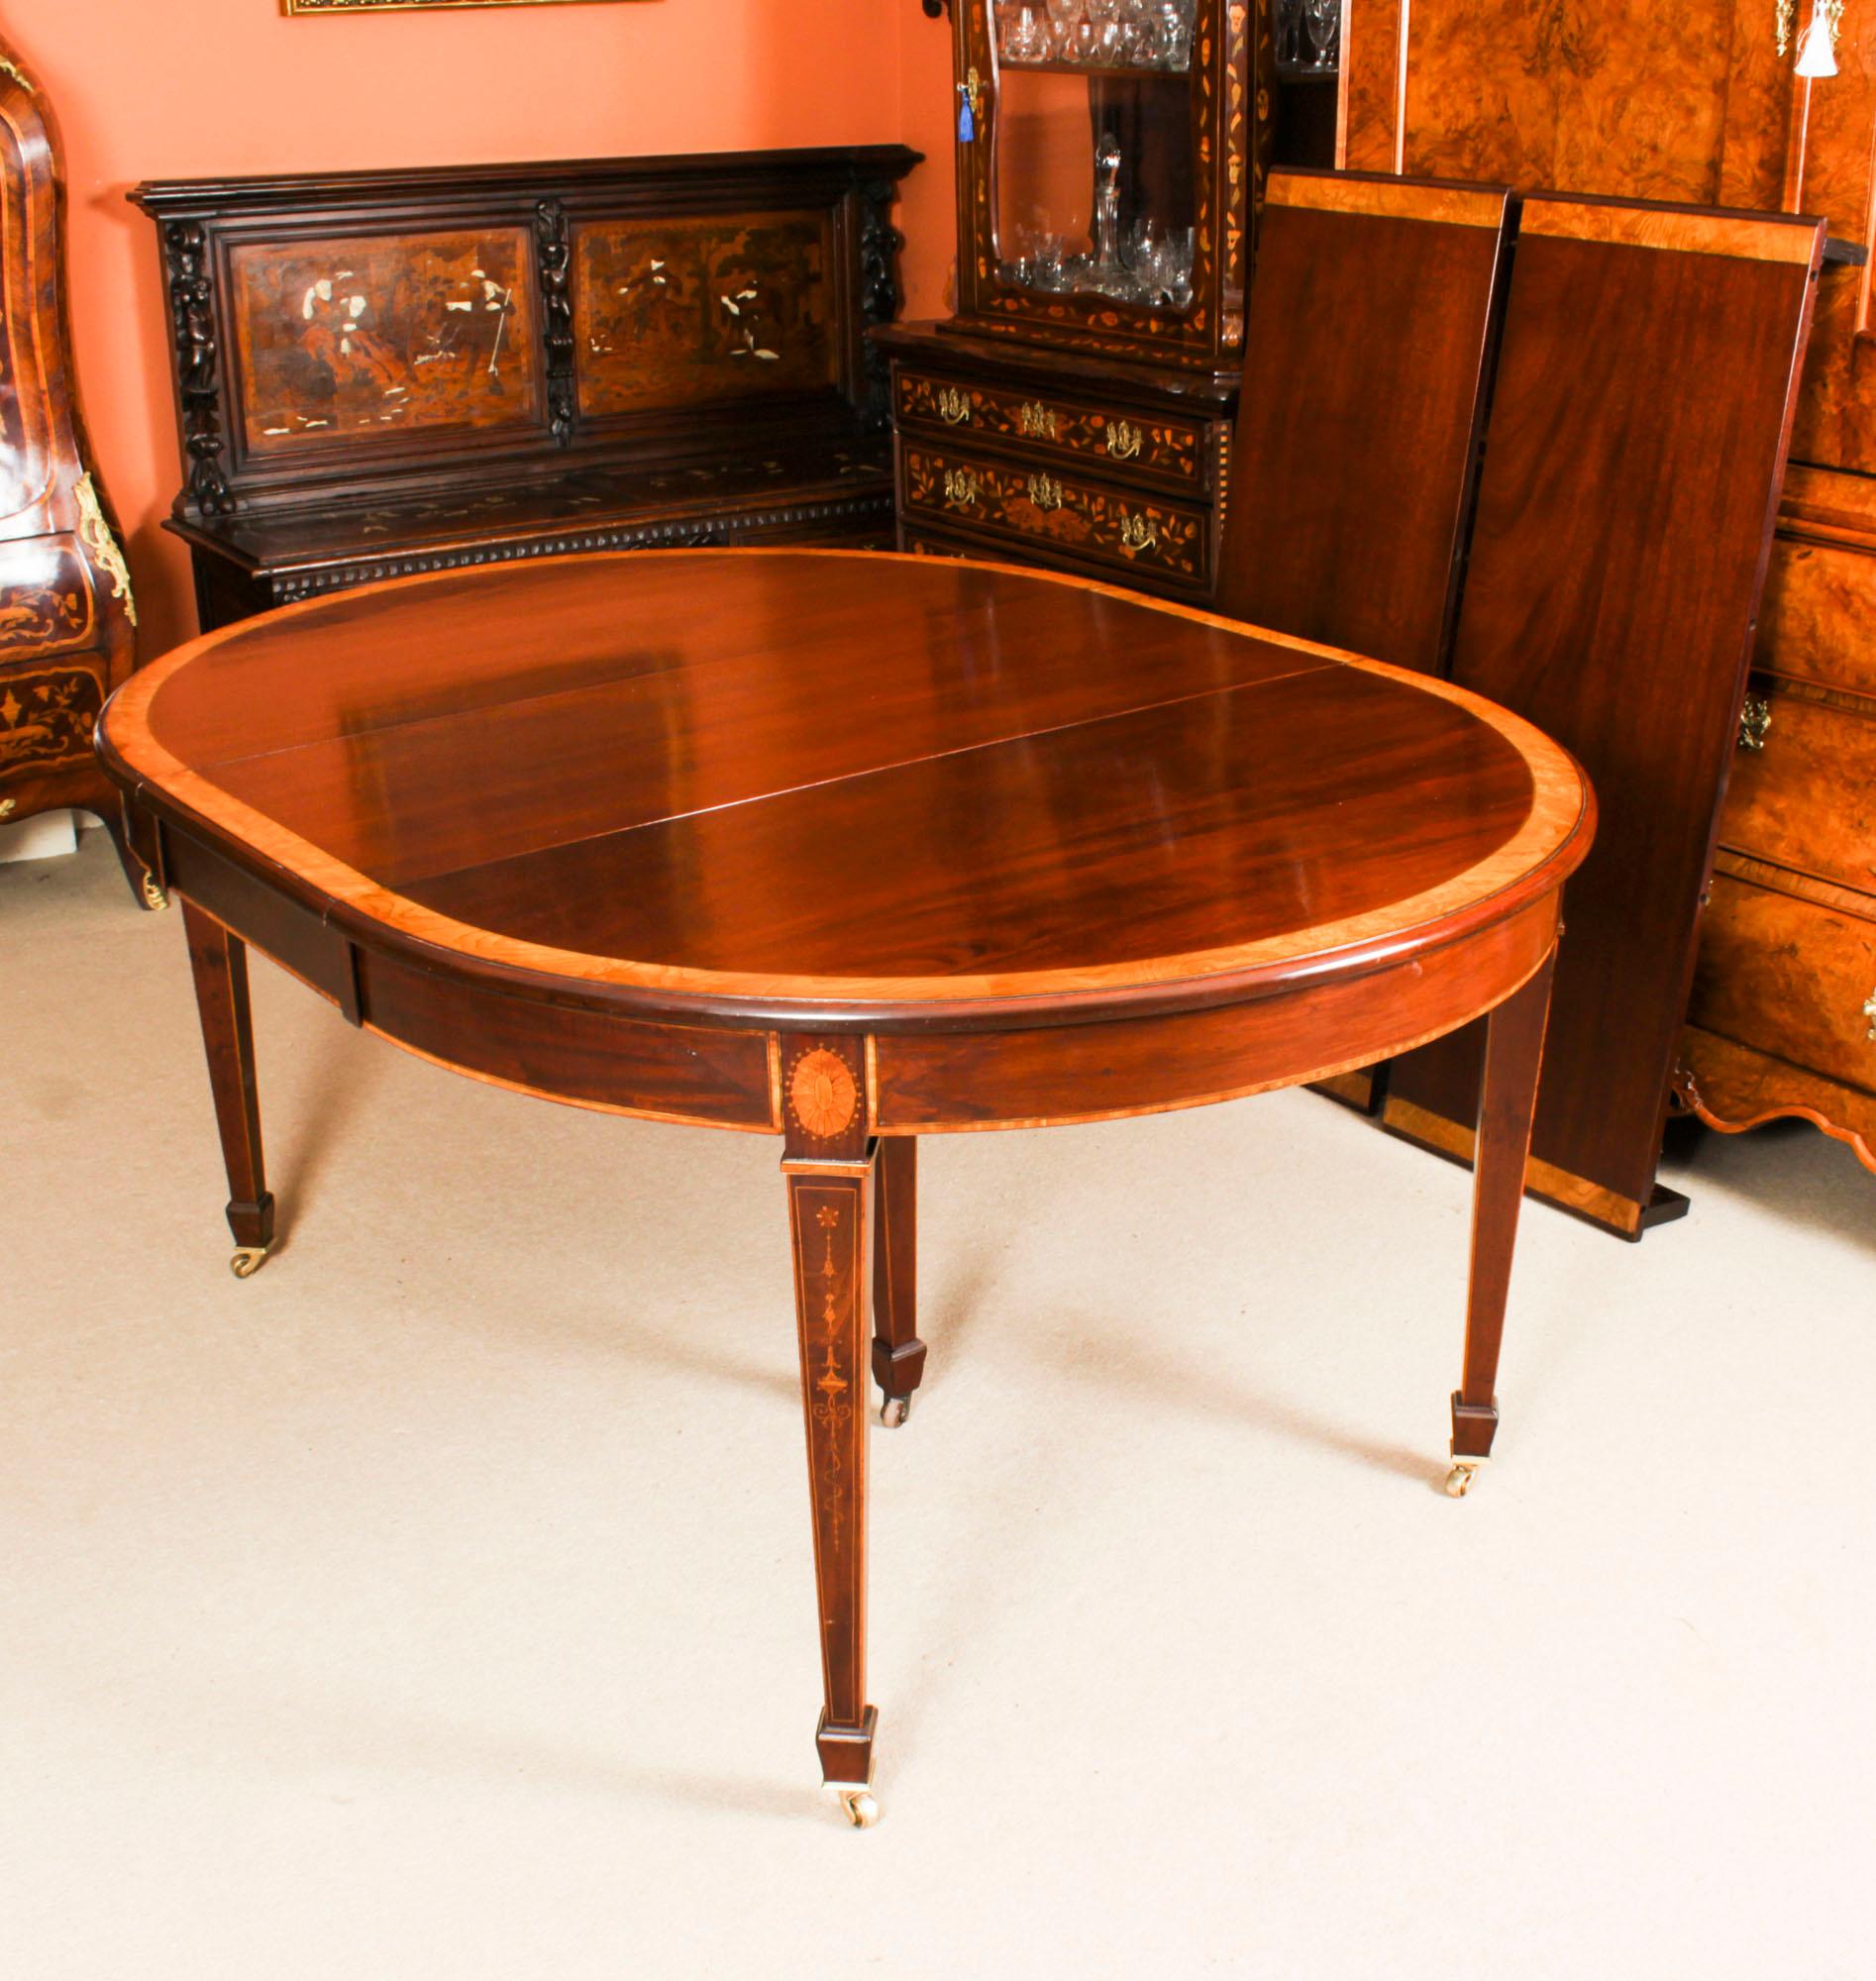 Antique Edwardian Inlaid Flame Mahogany Extending Dining Table Early 20th C. 2